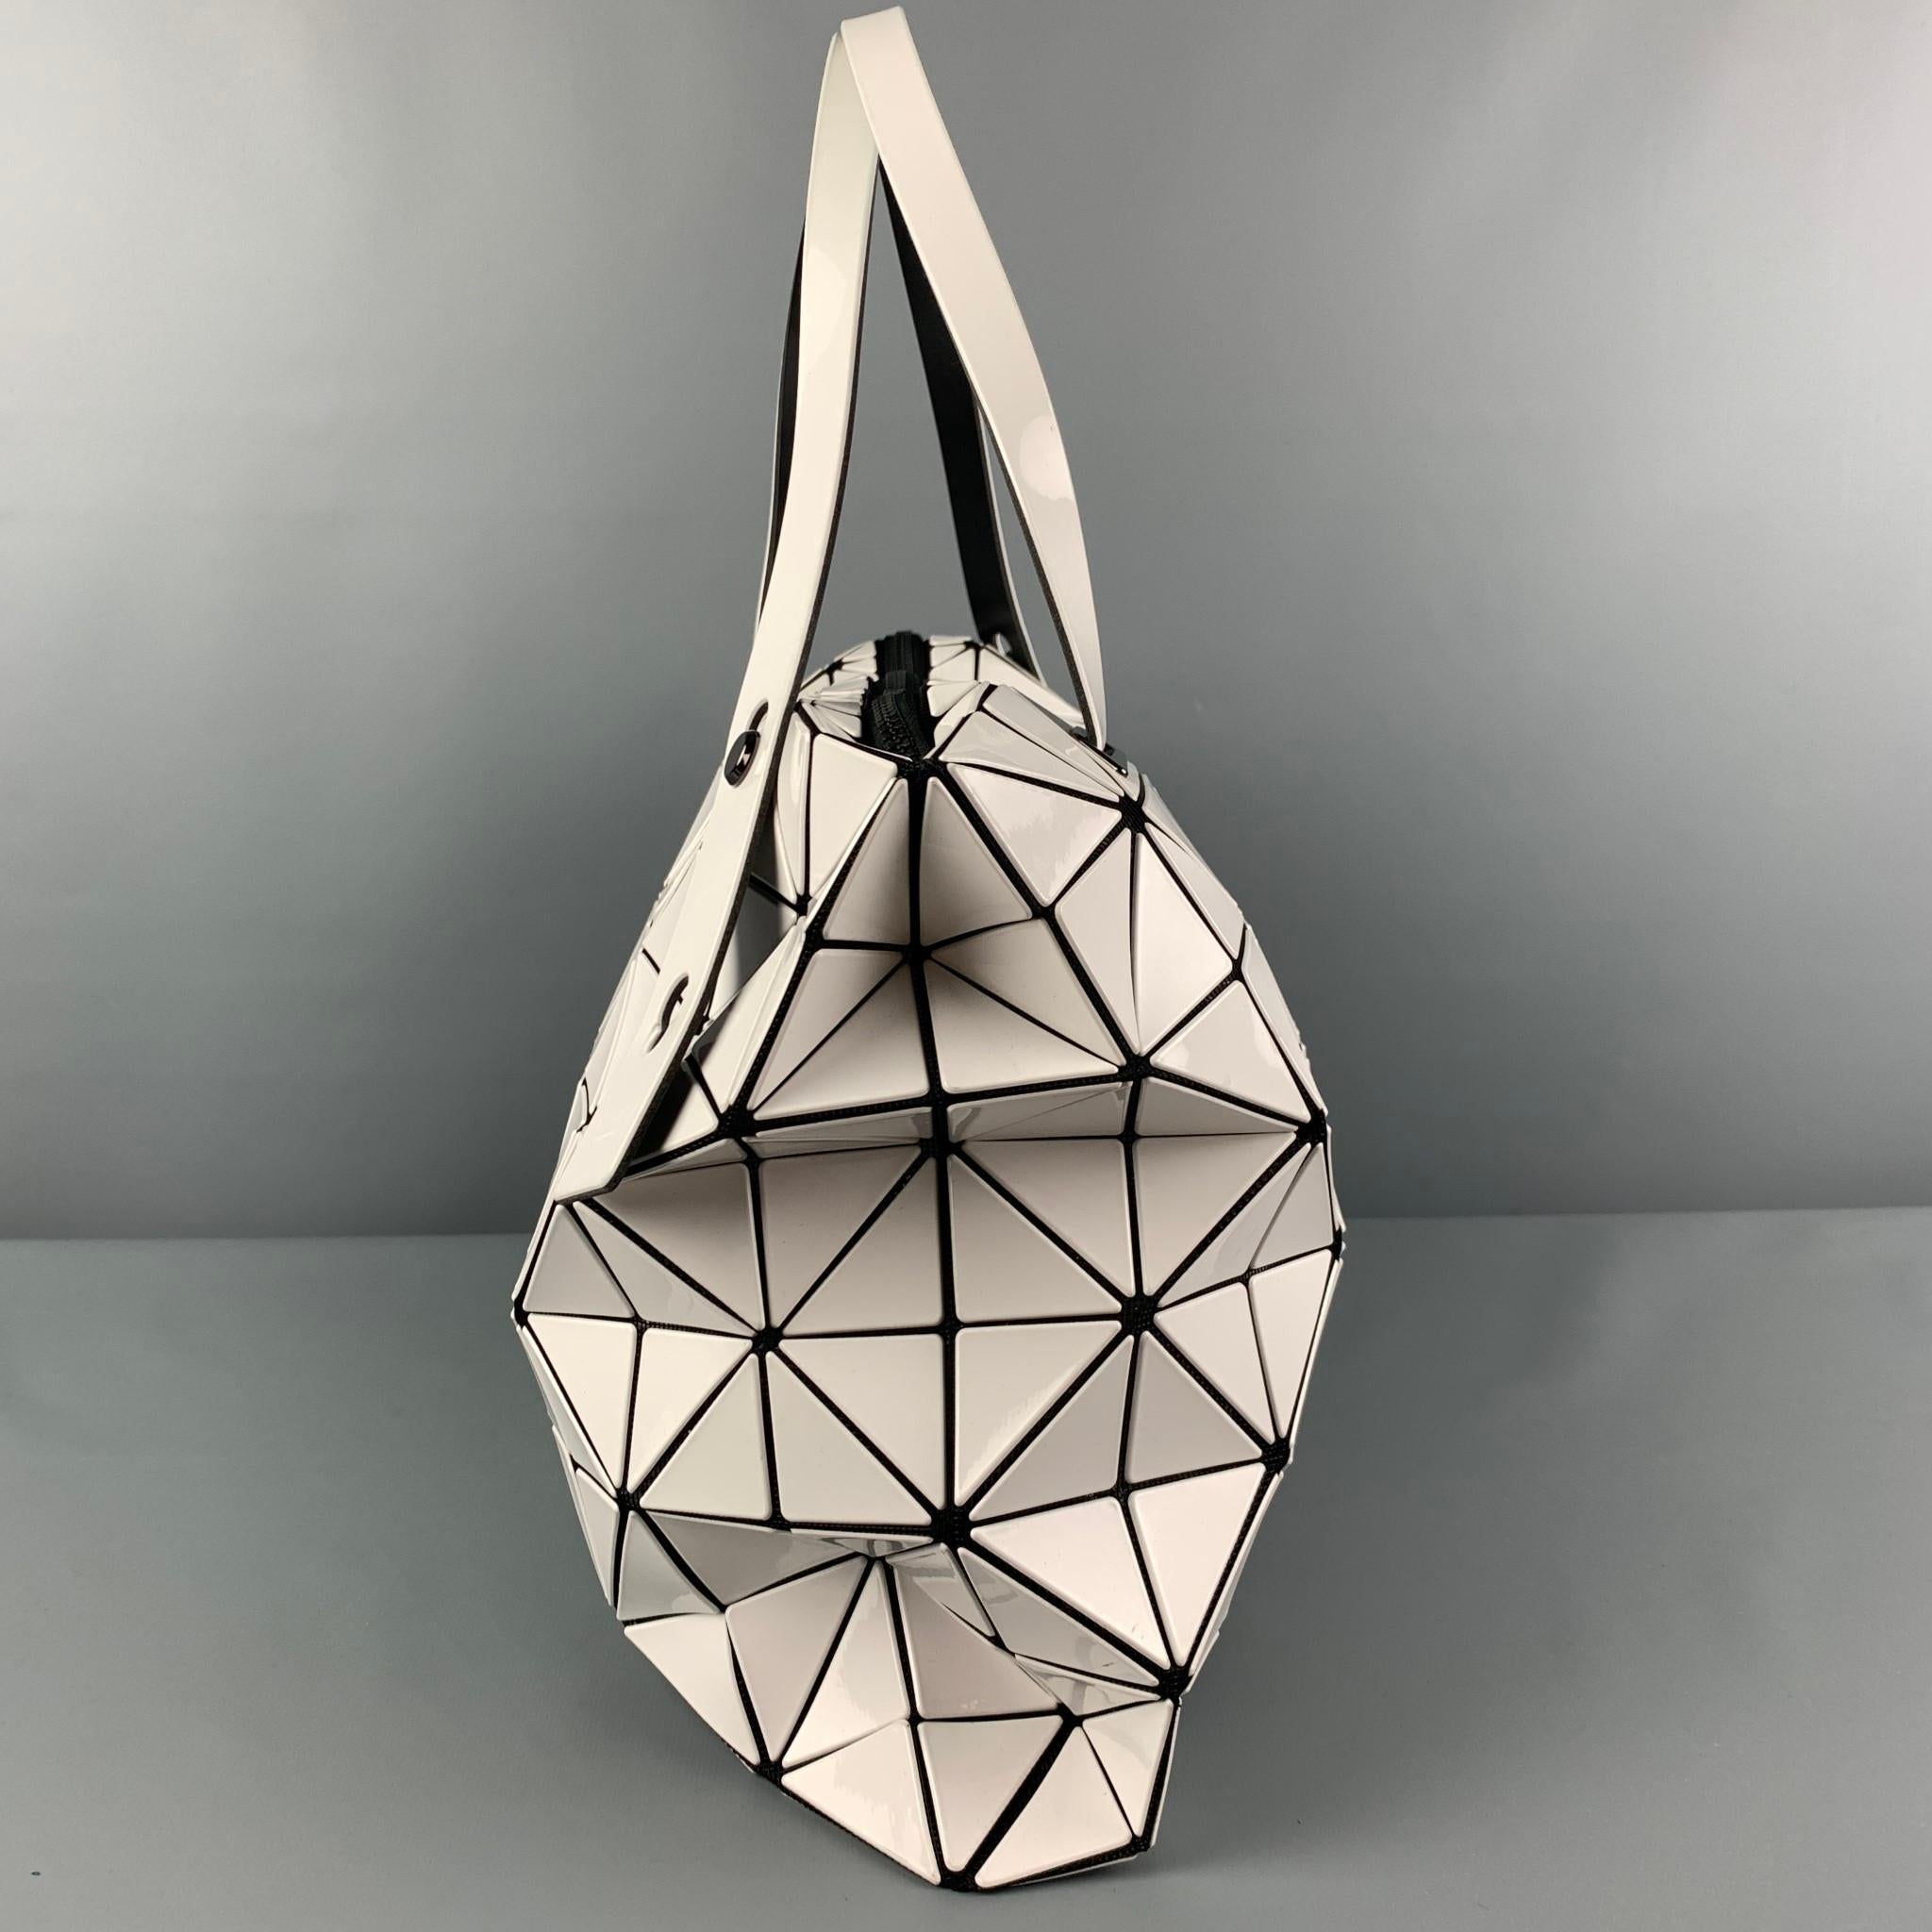 ISSEY MIYAKE BAO BAO bag comes in a white & black leather featuring signature triangular appliqués , mesh tote in black, adjustable top handles, and a inner zipper pocket. Made in Japan.

Very Good Pre-Owned Condition.

Measurements:

Length: 16